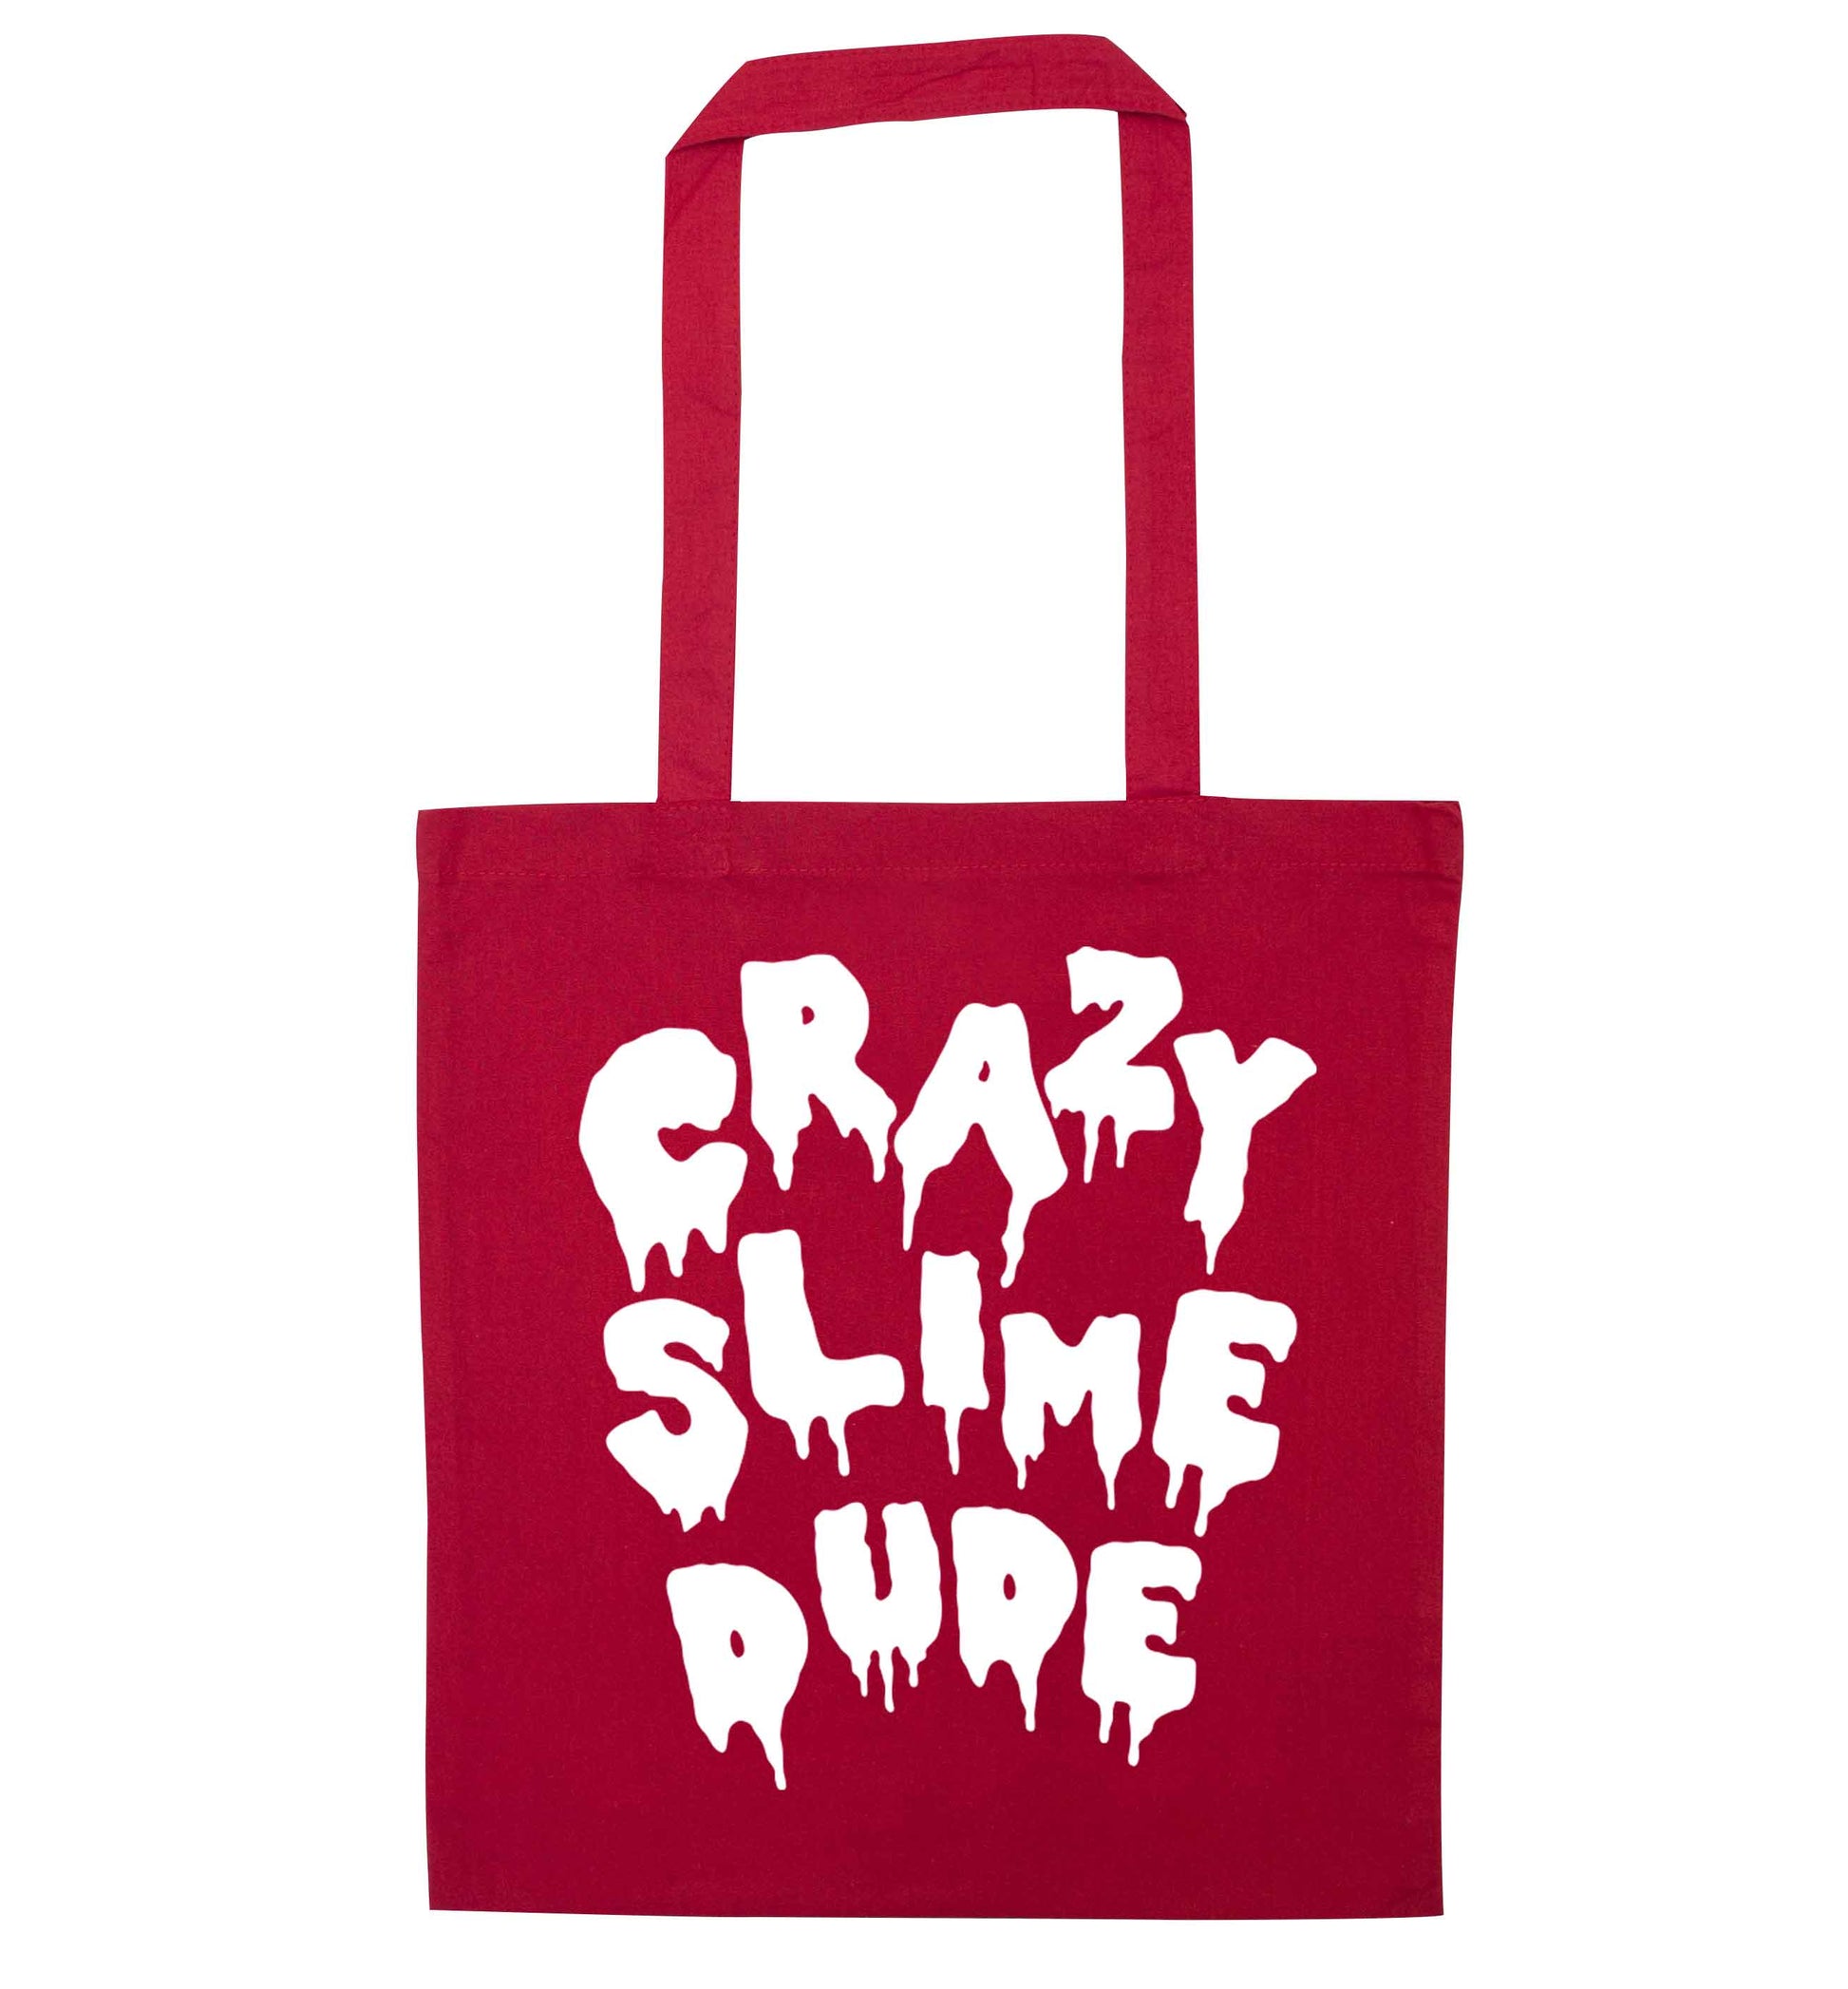 Crazy slime dude red tote bag